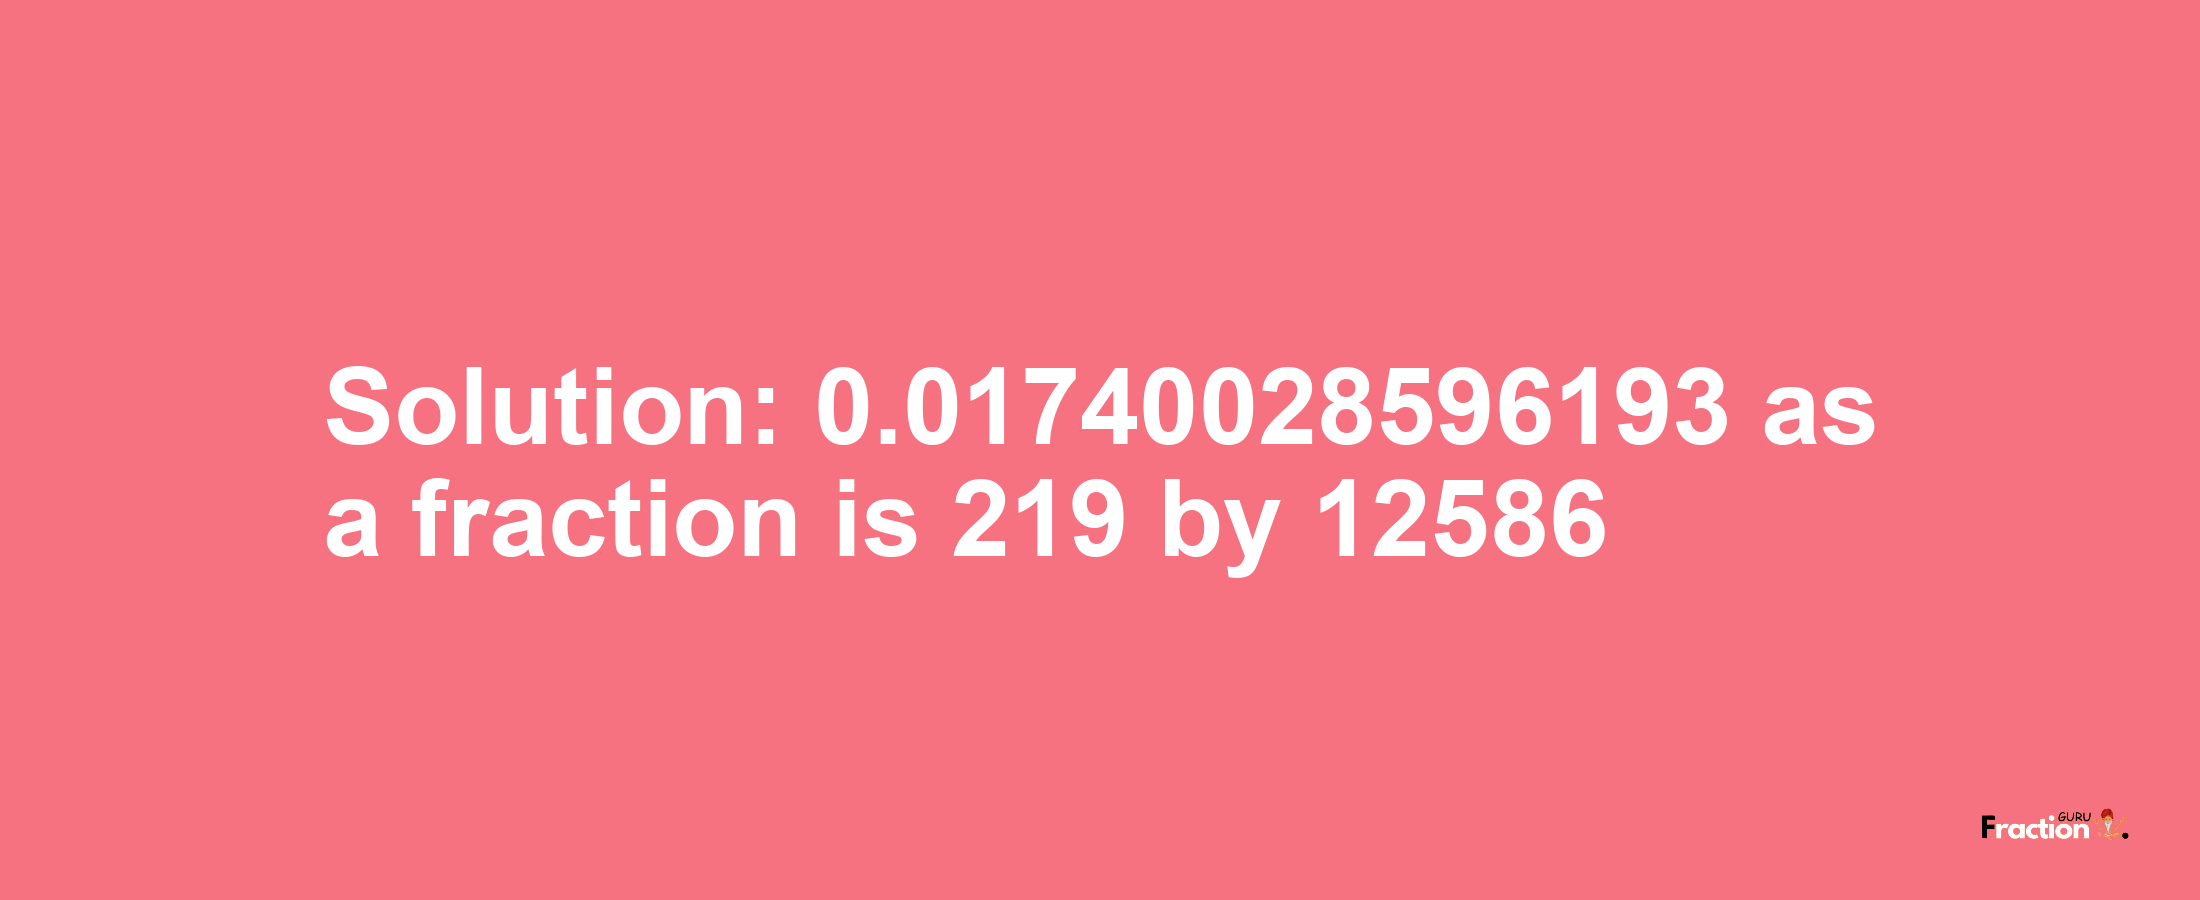 Solution:0.01740028596193 as a fraction is 219/12586